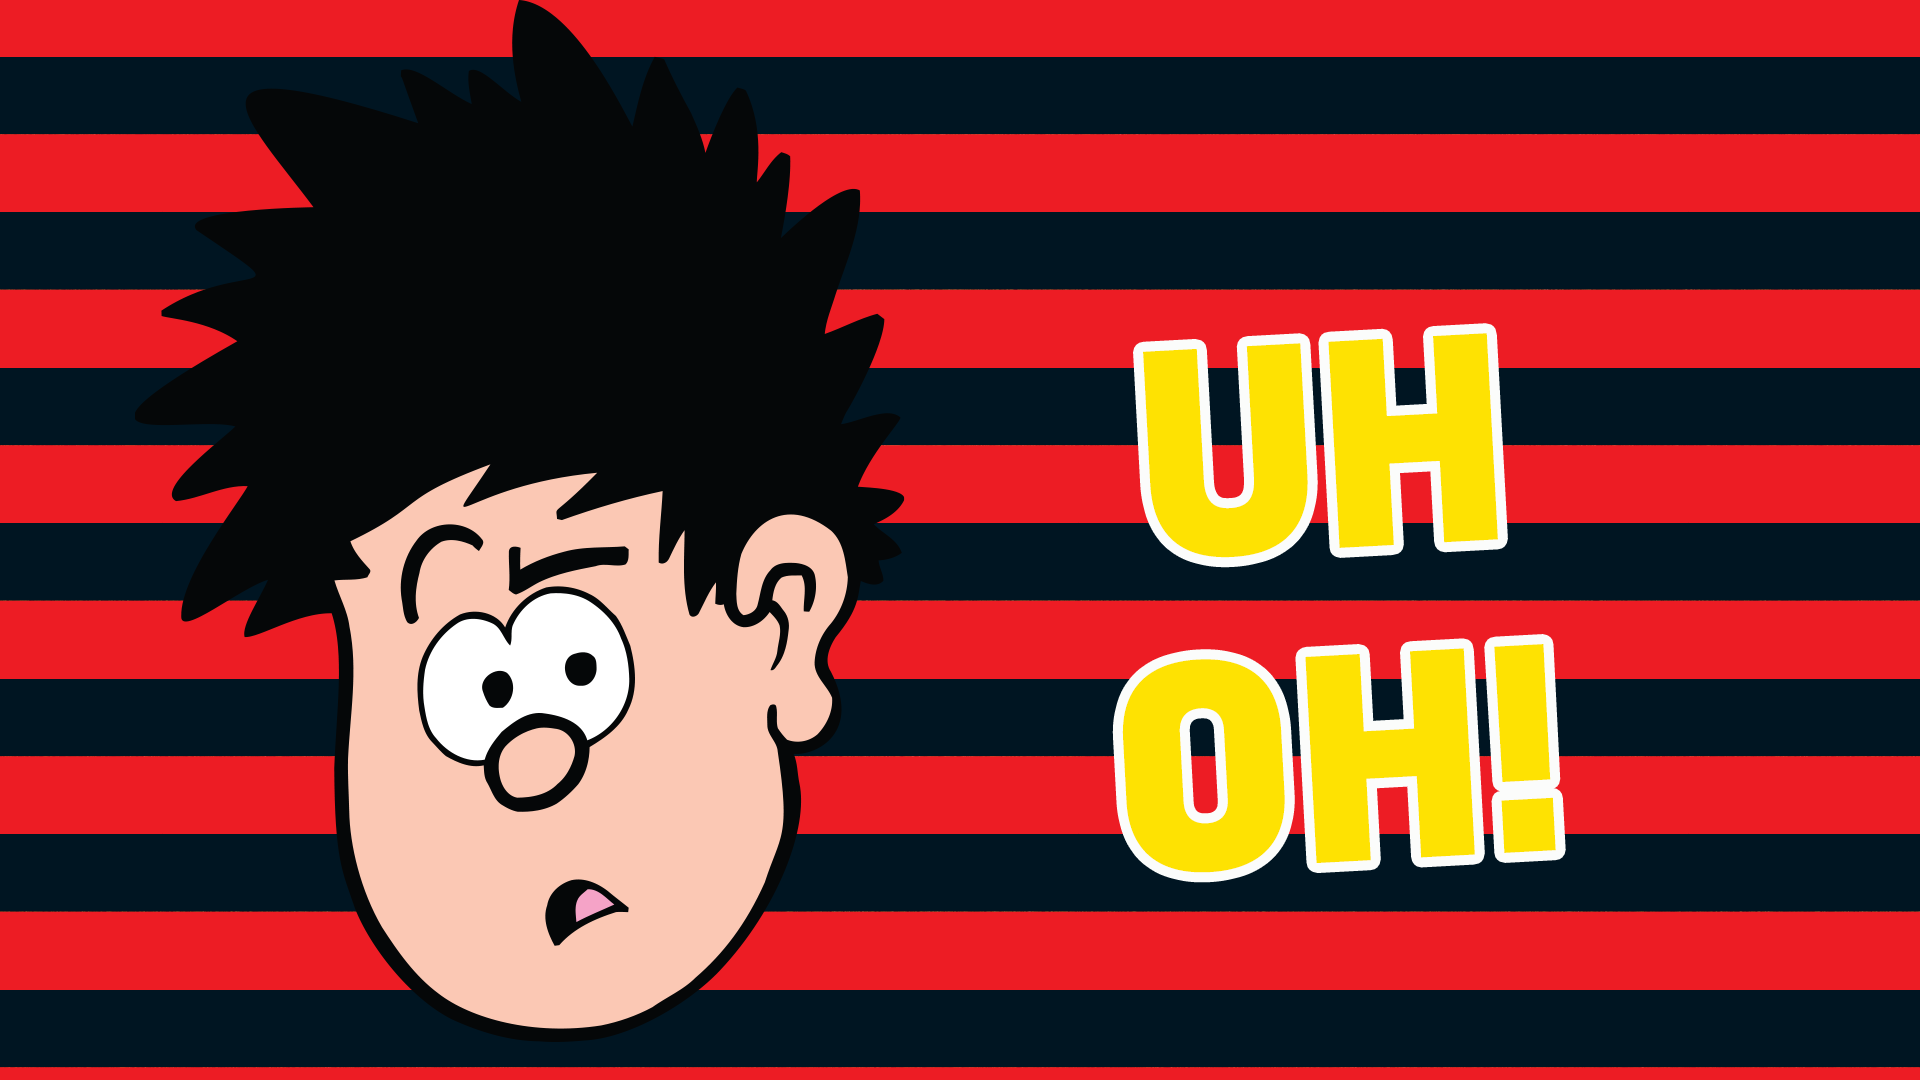 Nooo! Decidedly un-blamtastic! You didn't get any Beano history questions right, but don't despair! You can always try again!